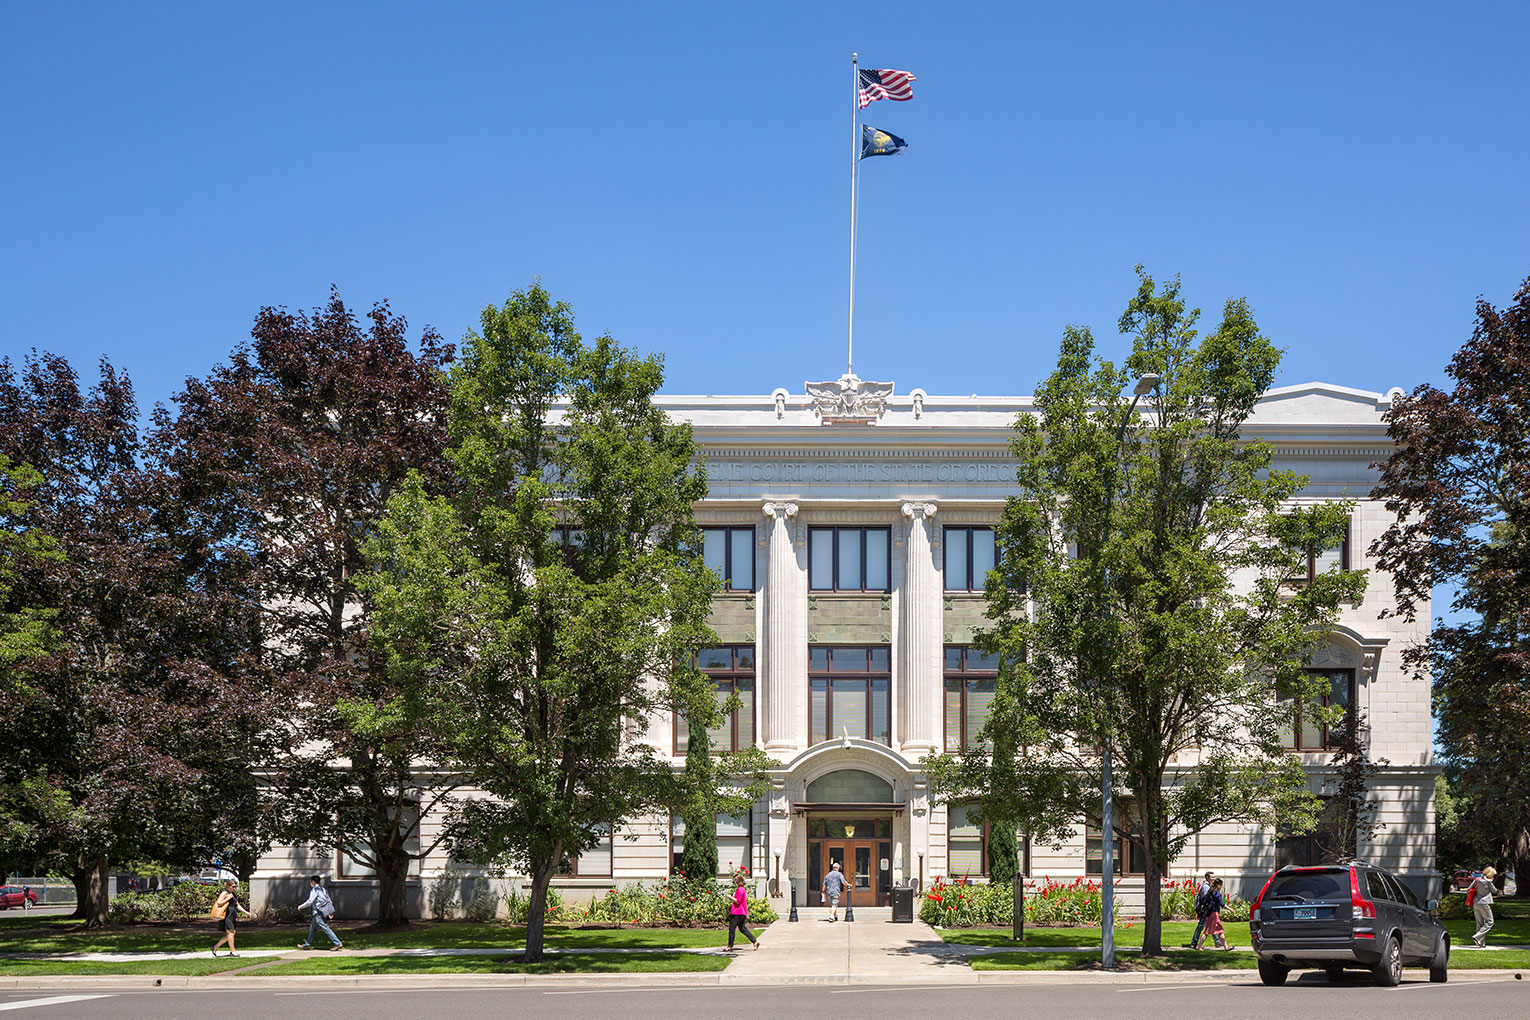 Exterior image of a large colonial-style Oregon Supreme Court Building clad in cream-colored terra cotta with five ornate columns in relief on the front of the building's facade.